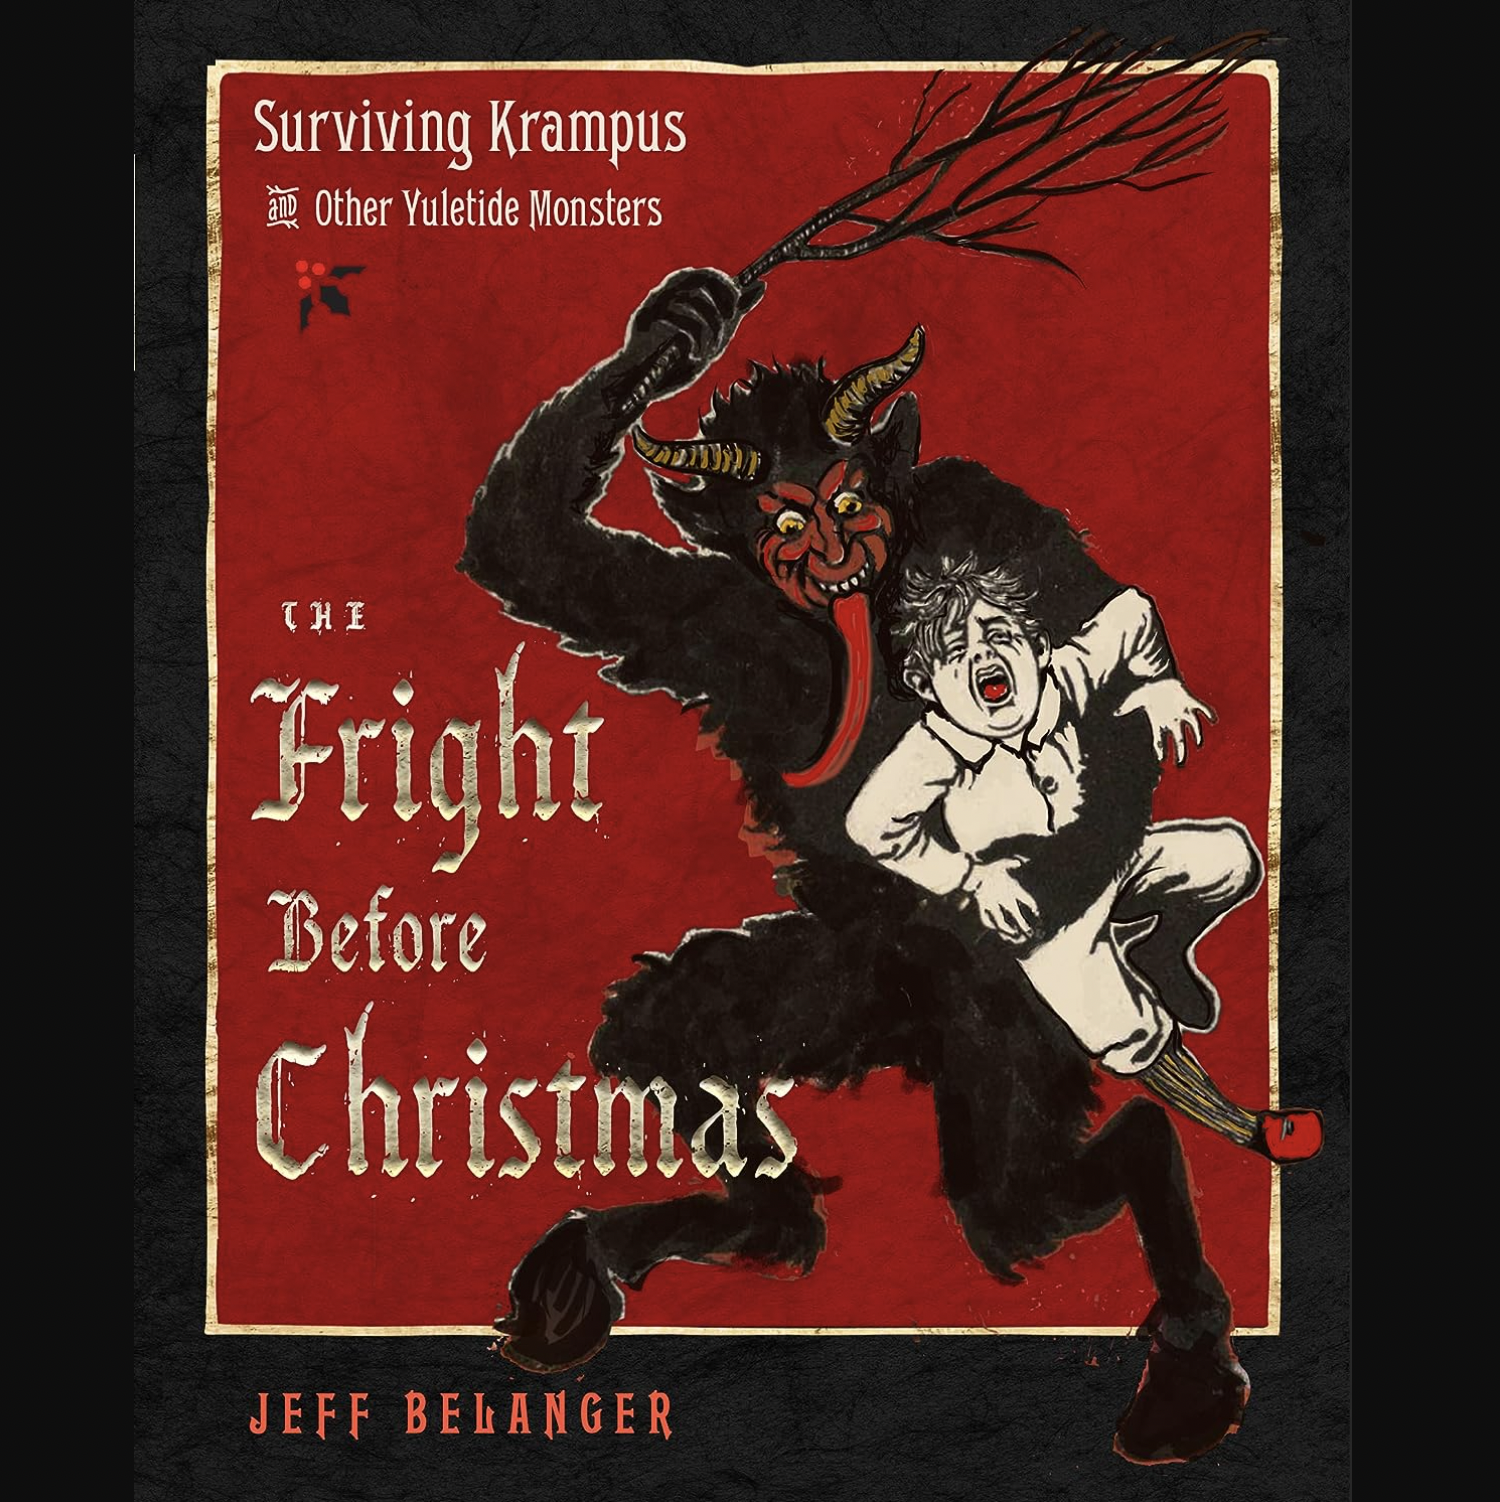 The Fright Before Christmas: Surviving Krampus and Other Yuletide Monsters Witches and Ghosts by Jeff Belanger